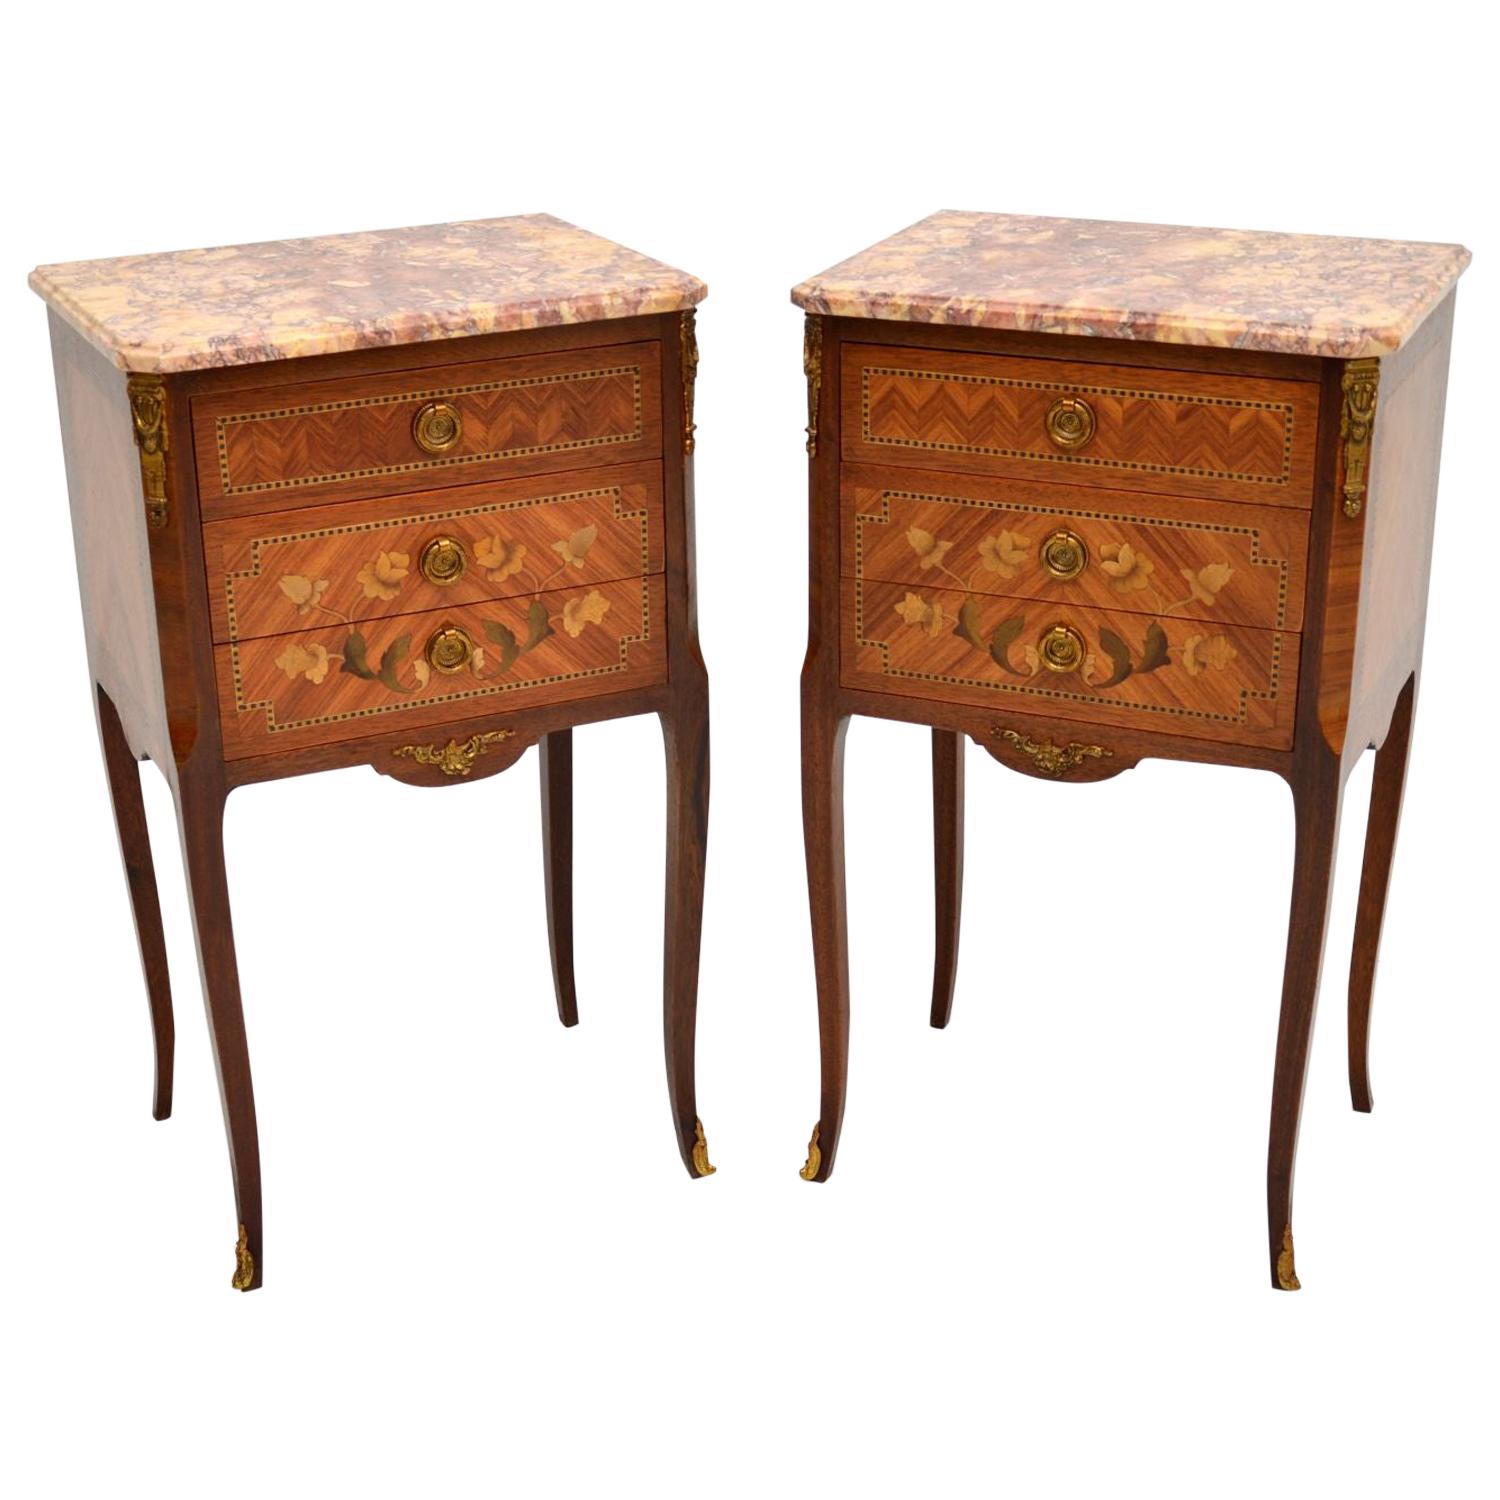 Pair of Antique French Inlaid Marble Top Bedside Chests